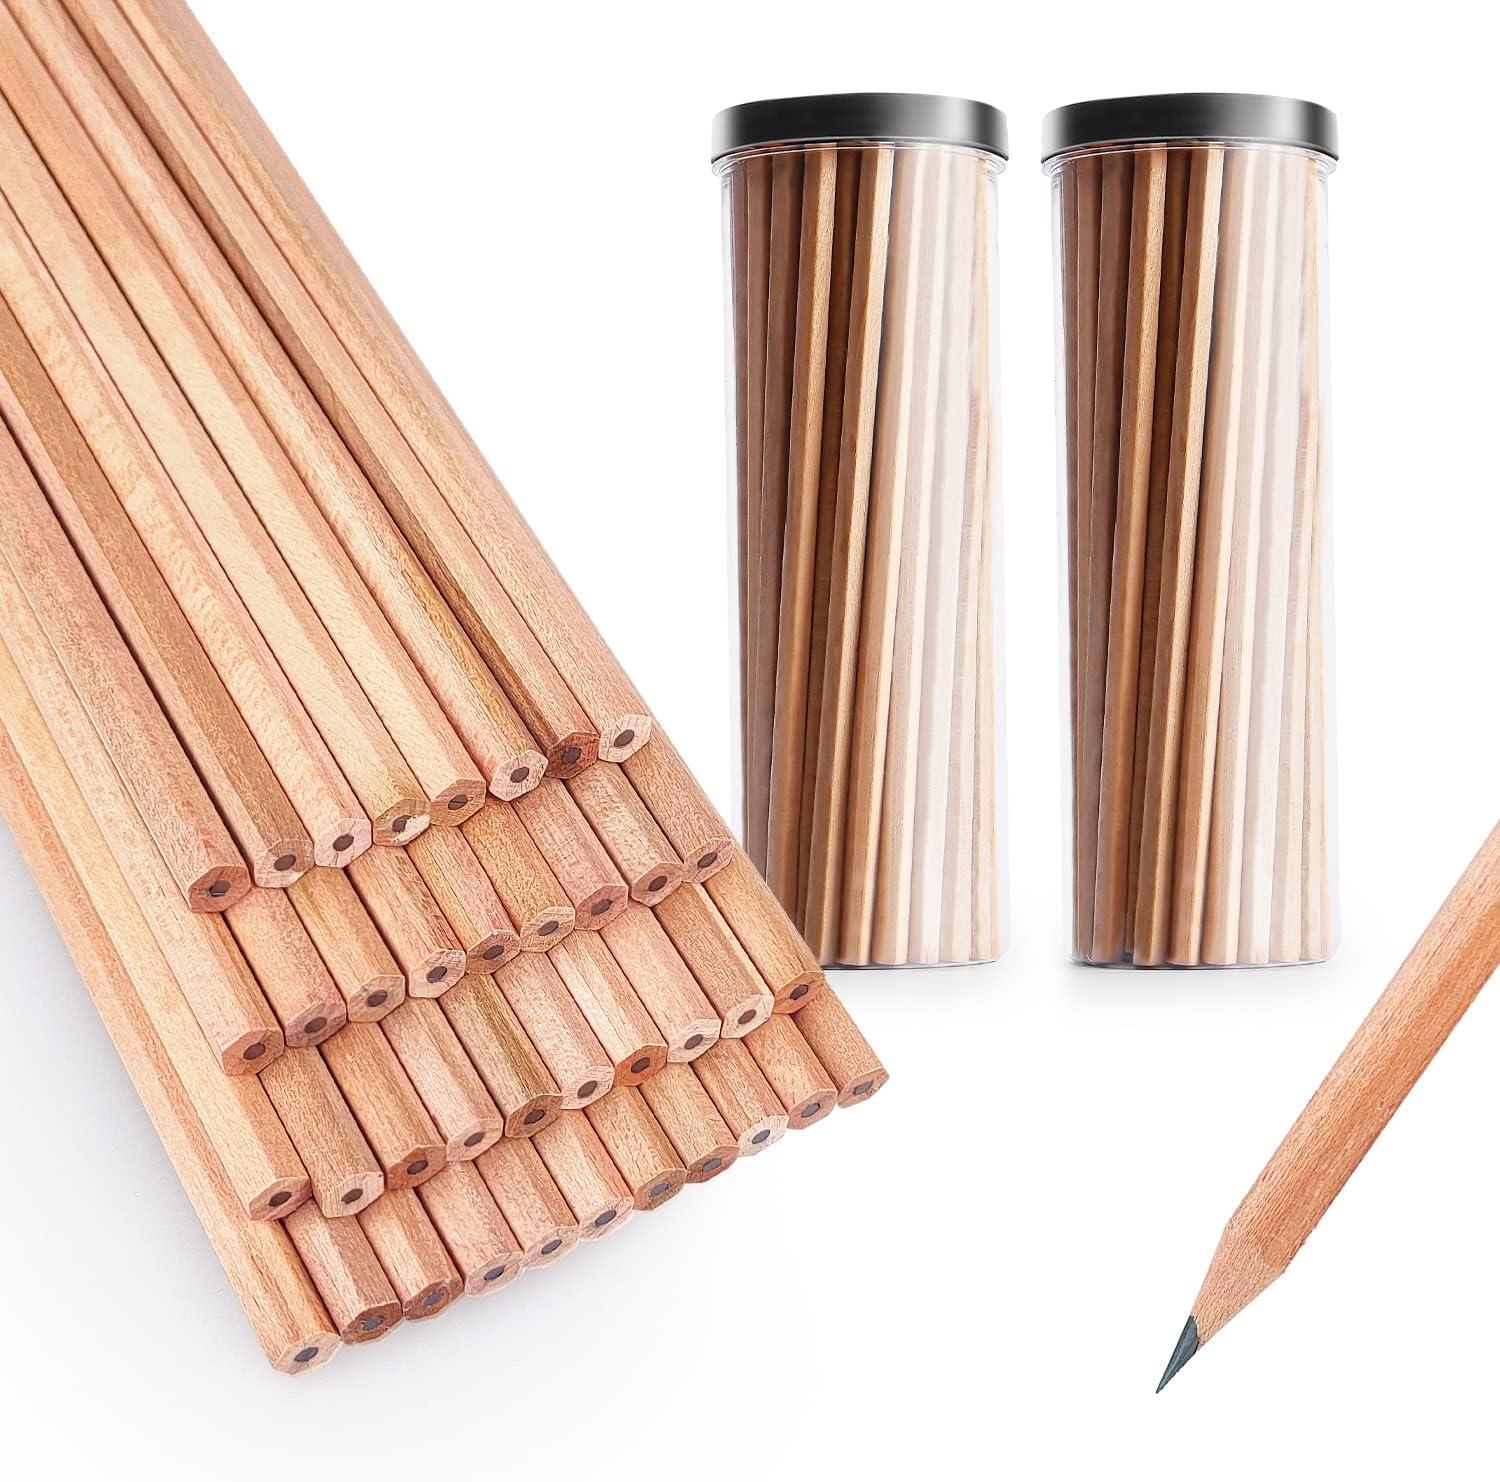 hb pencil - 50 pcs bucket packed natural wooden hexagonal pencils higher hardness for writing drawing